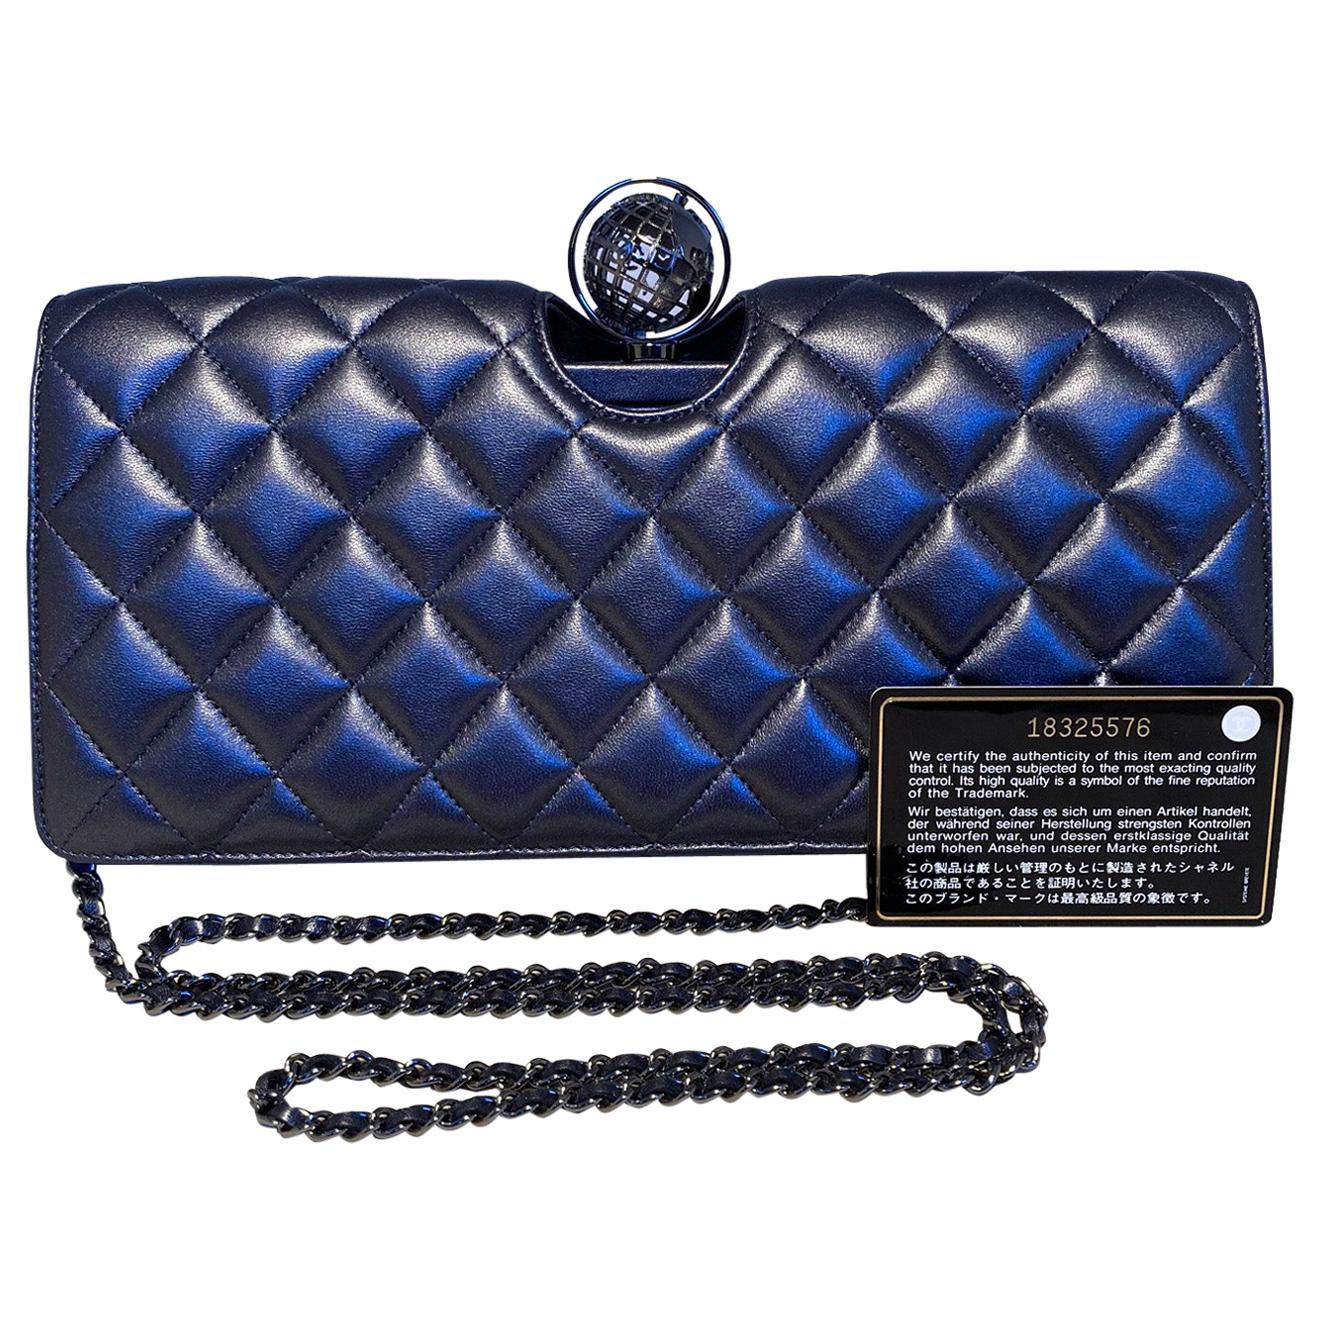 Chanel Around the World Classic Flap Bag